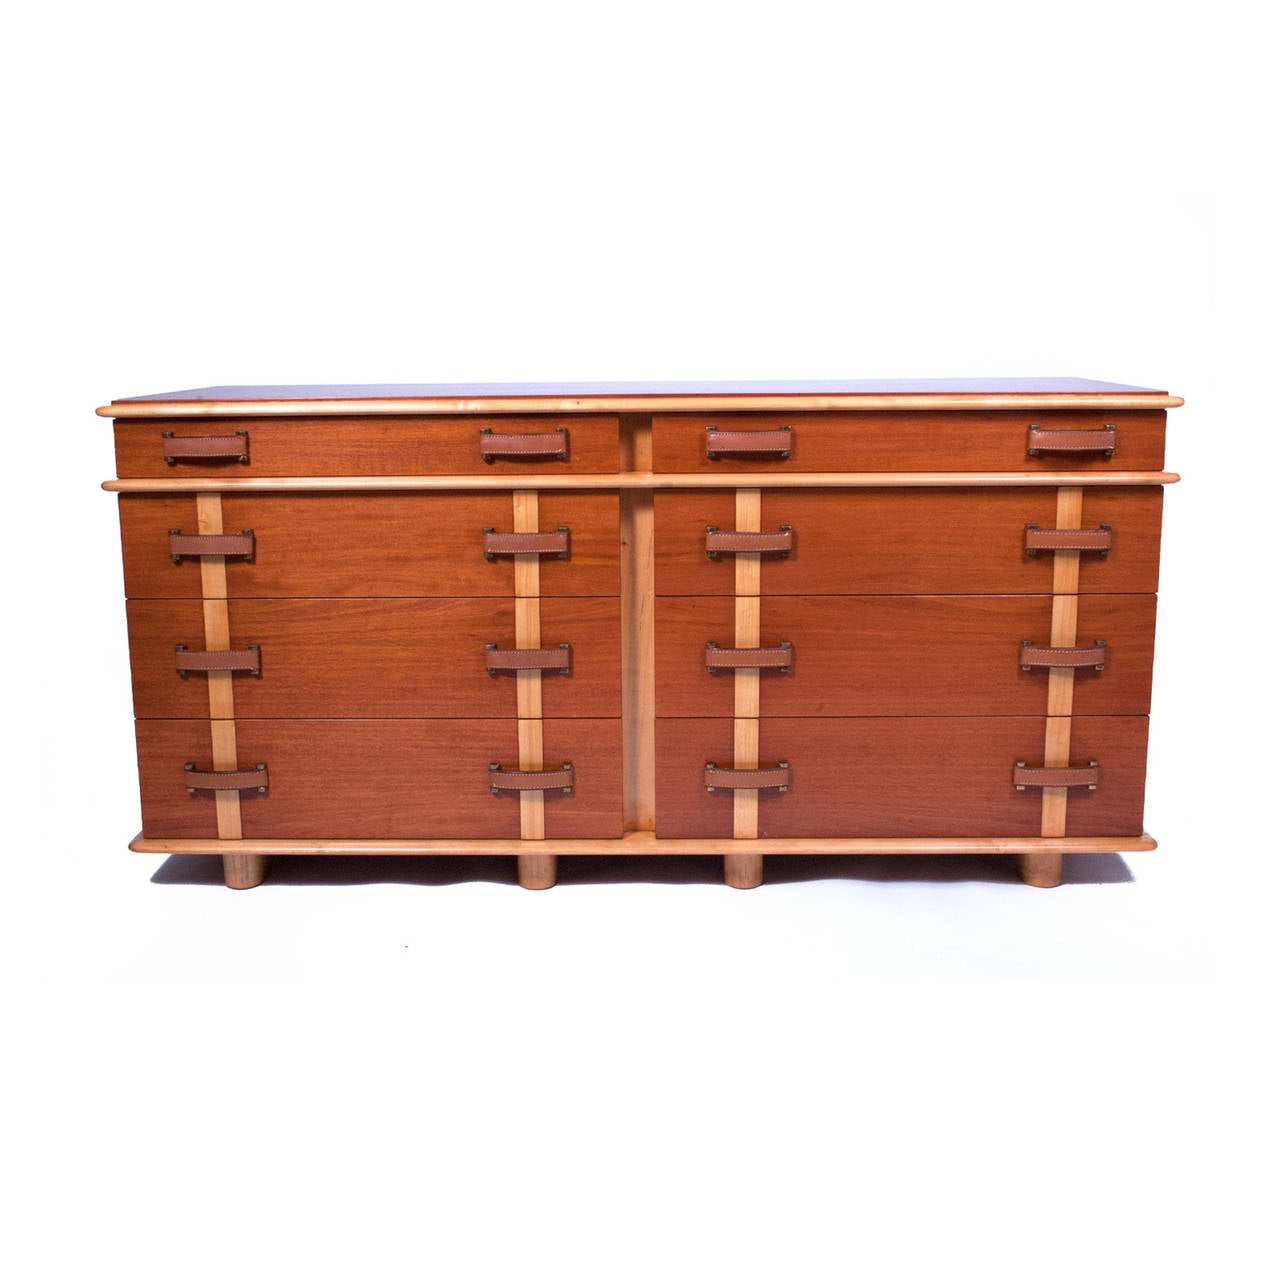 Rare double chest of drawers, model 1041B-160, in the Station Wagon series, mahogany case and drawer fronts with birch detail and legs. Leather and brass drawer pulls. Marked in drawer, Johnson Furniture Co. Marked on back with model number.